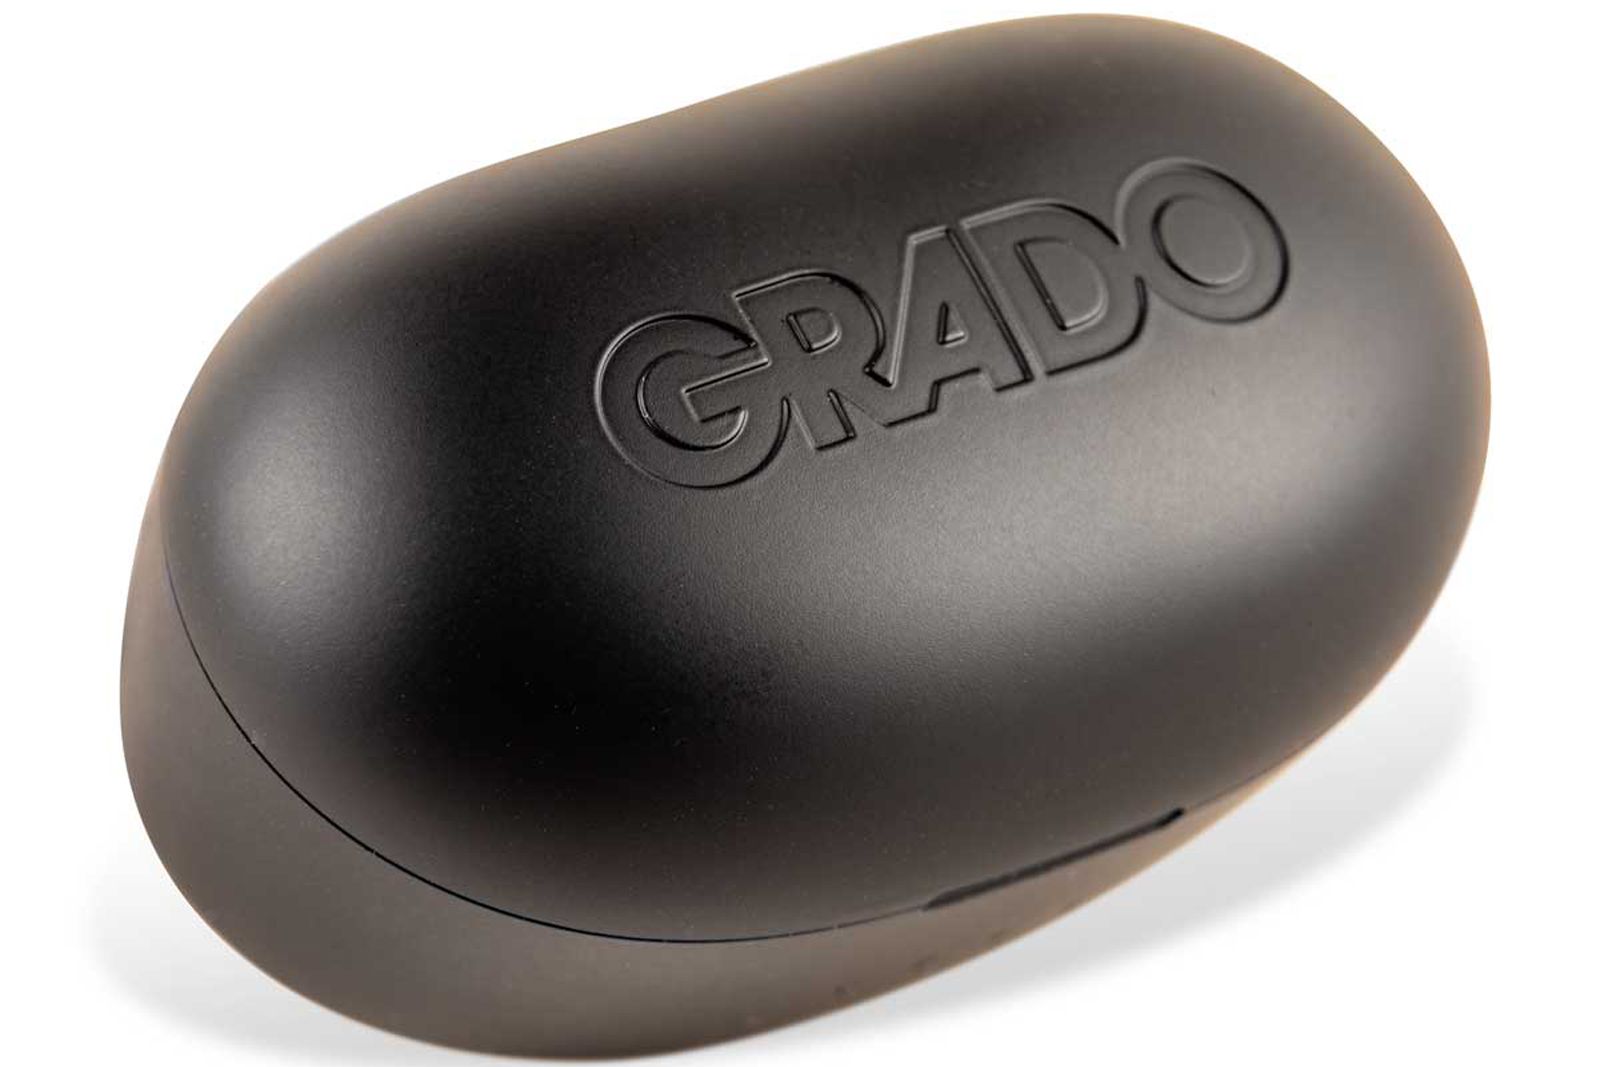 Grado's GT220 are its first-ever true wireless earbuds photo 3